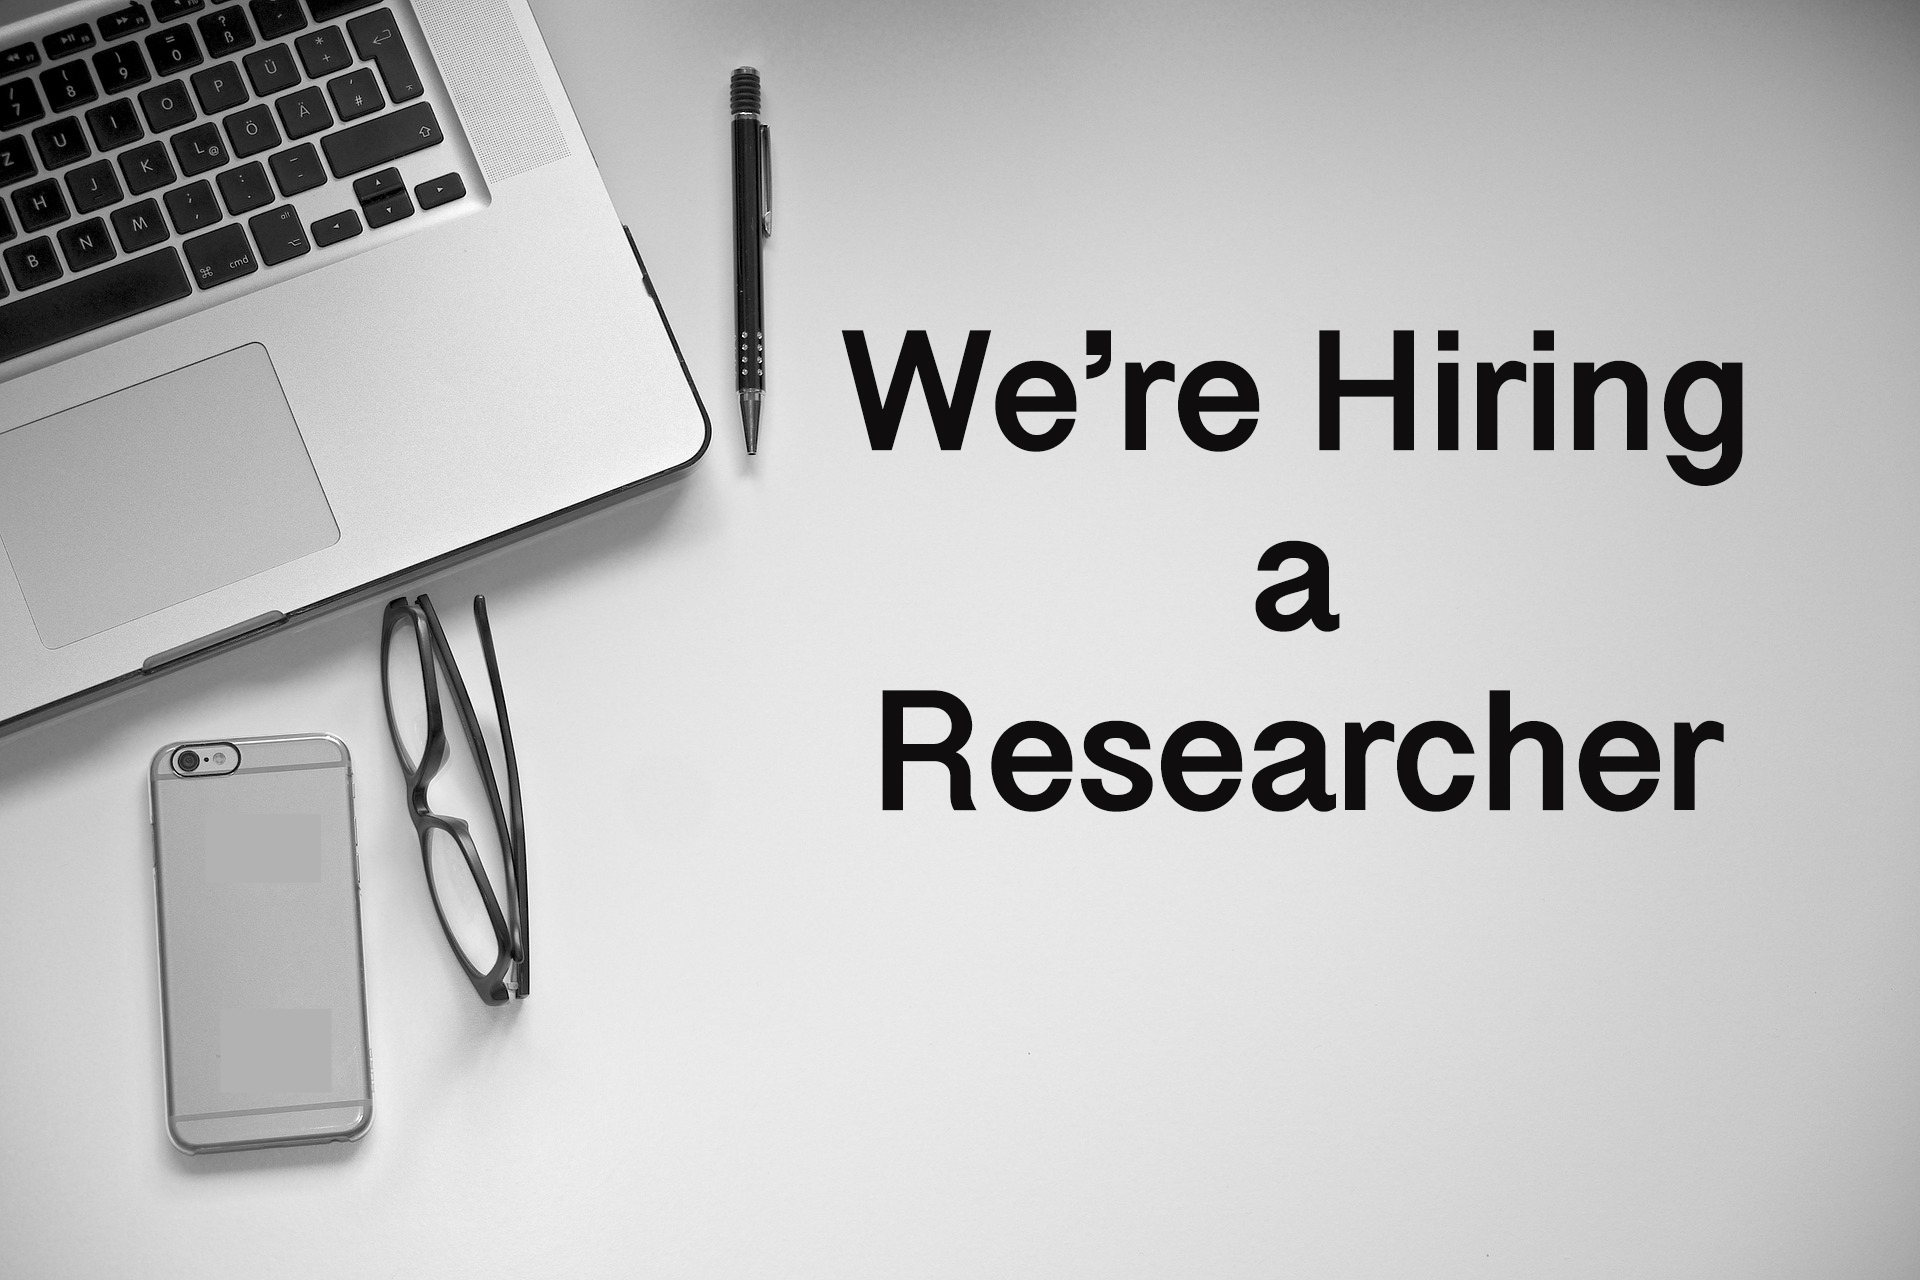 [deadline 05/12/2022] Call for applications for Research Scientists, Research Assistants, Developers, and Managers for employment as part of the projects WeNet and RISE